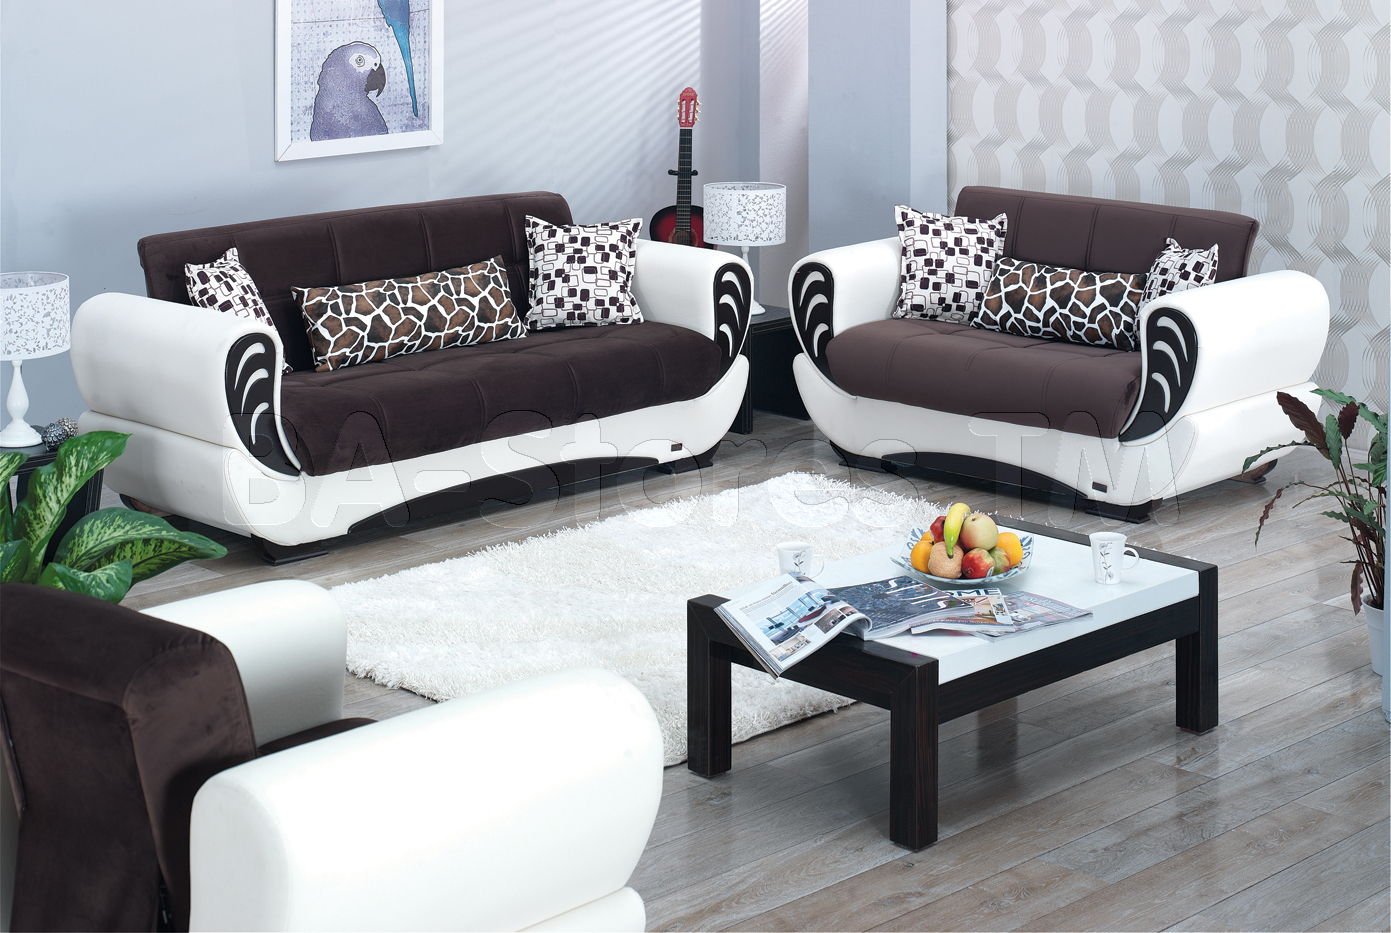 Wooden Sofa Set Designs For Small Living Room With Price